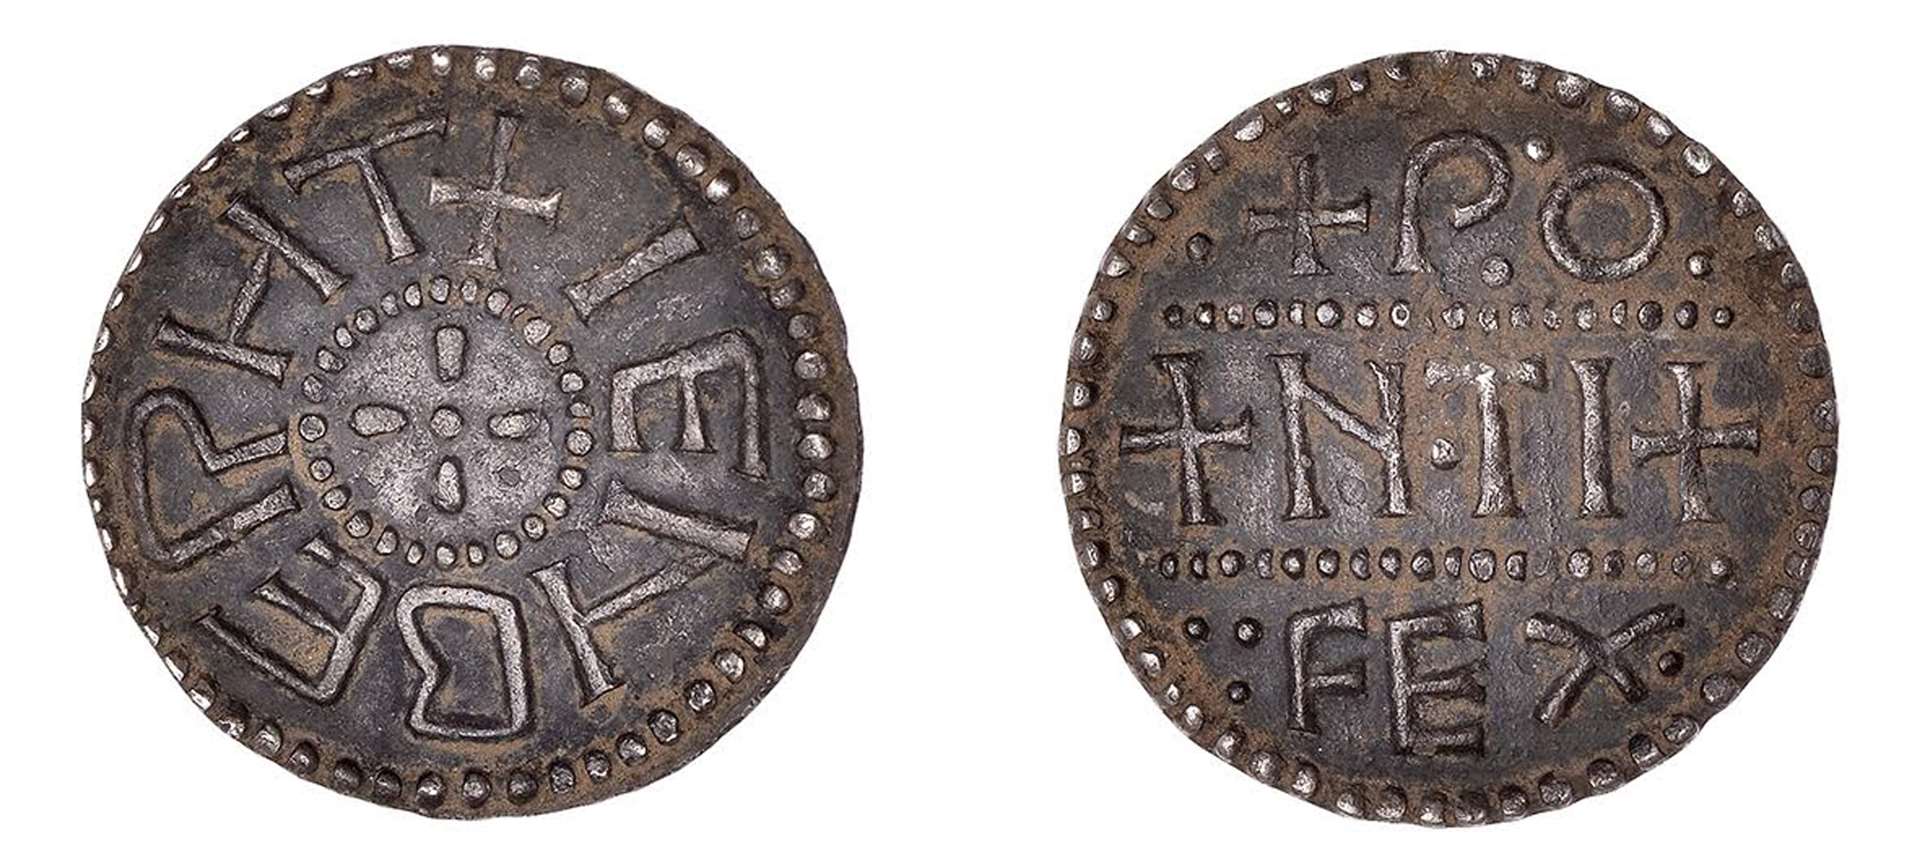 The rare Anglo Saxon coin found by a detectorist which could sell for £12,000